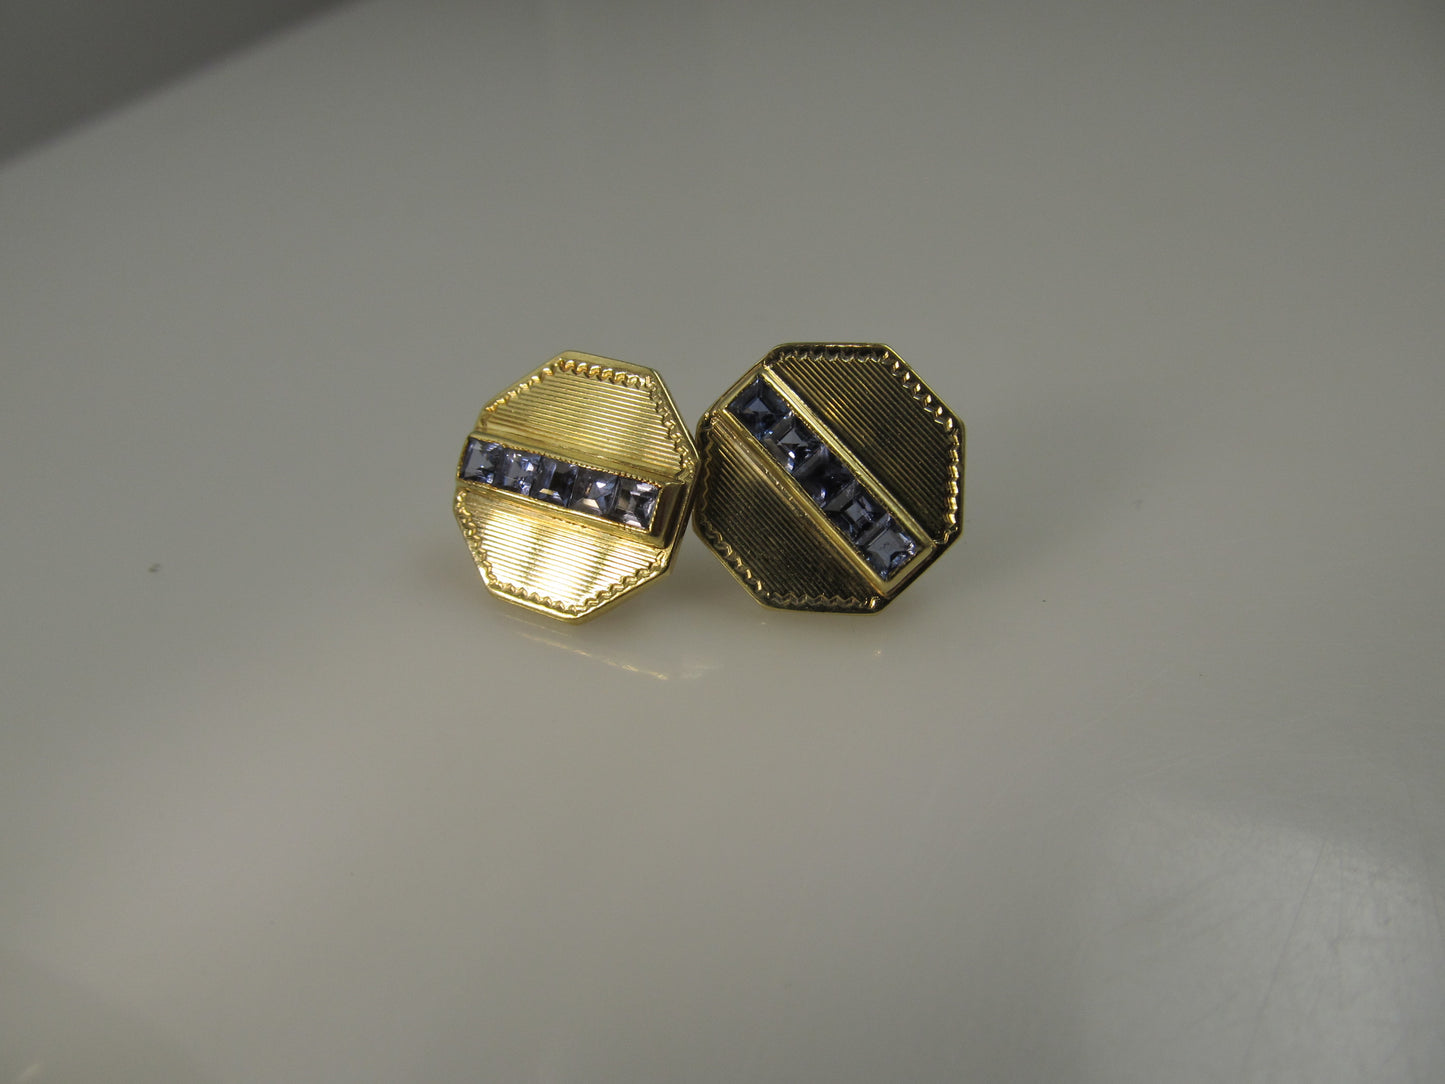 14k Yellow Gold Earrings With Sapphires, Converted From Cufflinks, Circa 1920.